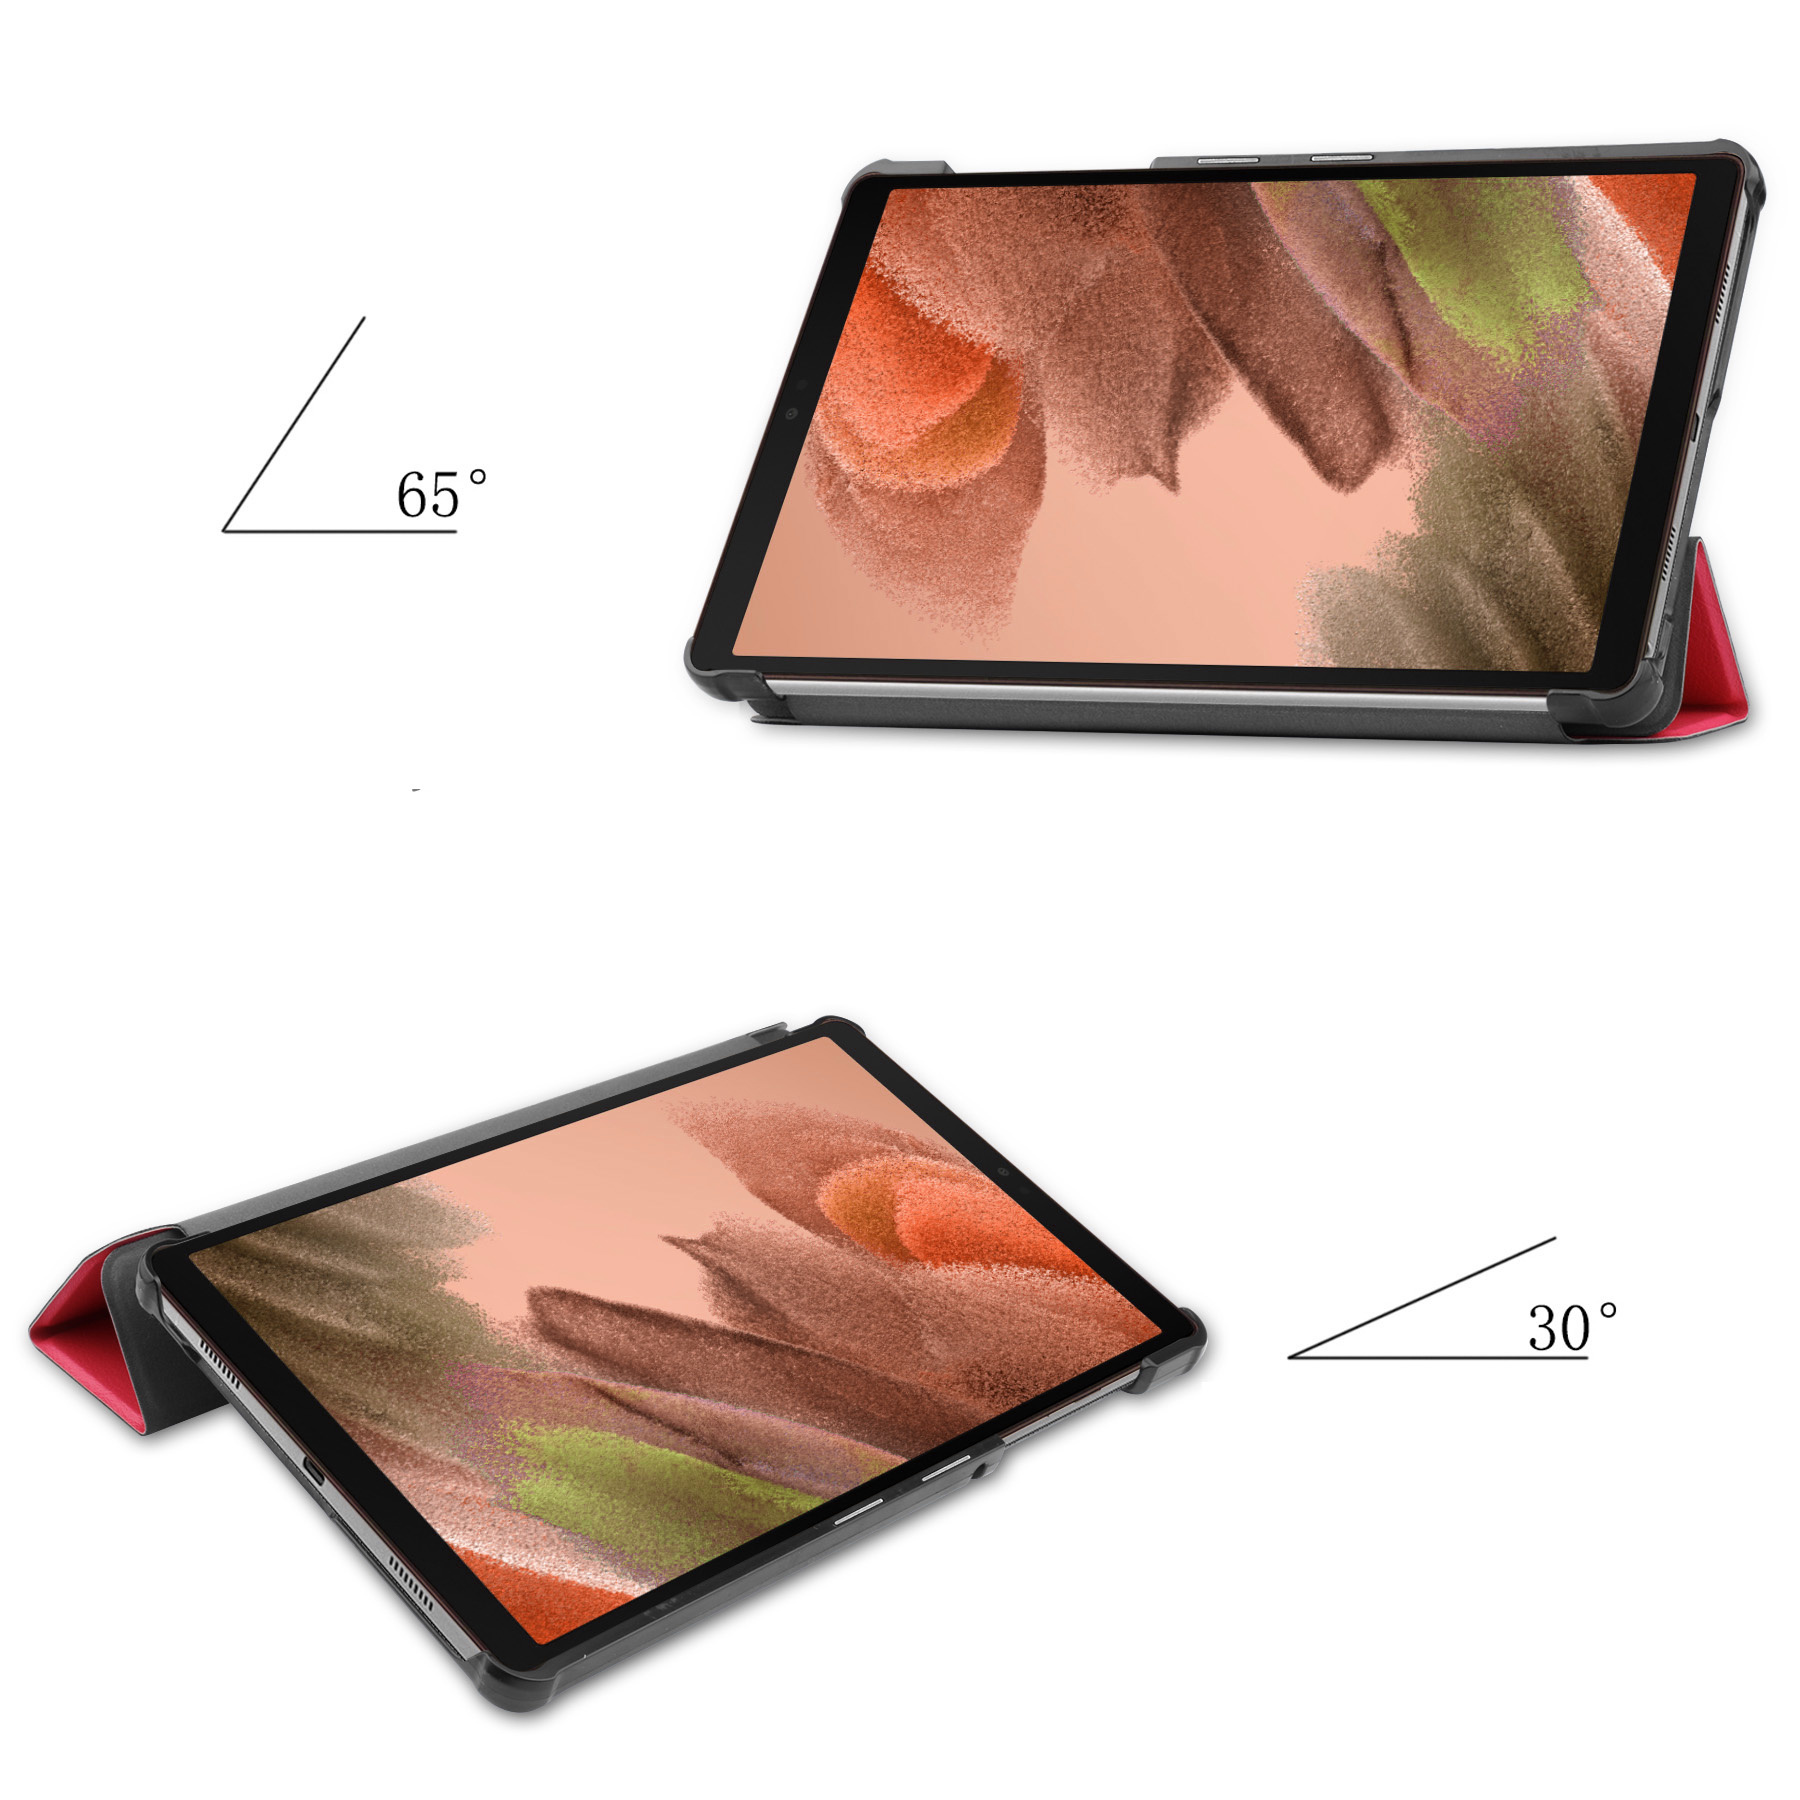 Samsung Galaxy Tab S6 Lite Hoesje Met Screenprotector Case Hard Cover Hoes Book Case - Rood